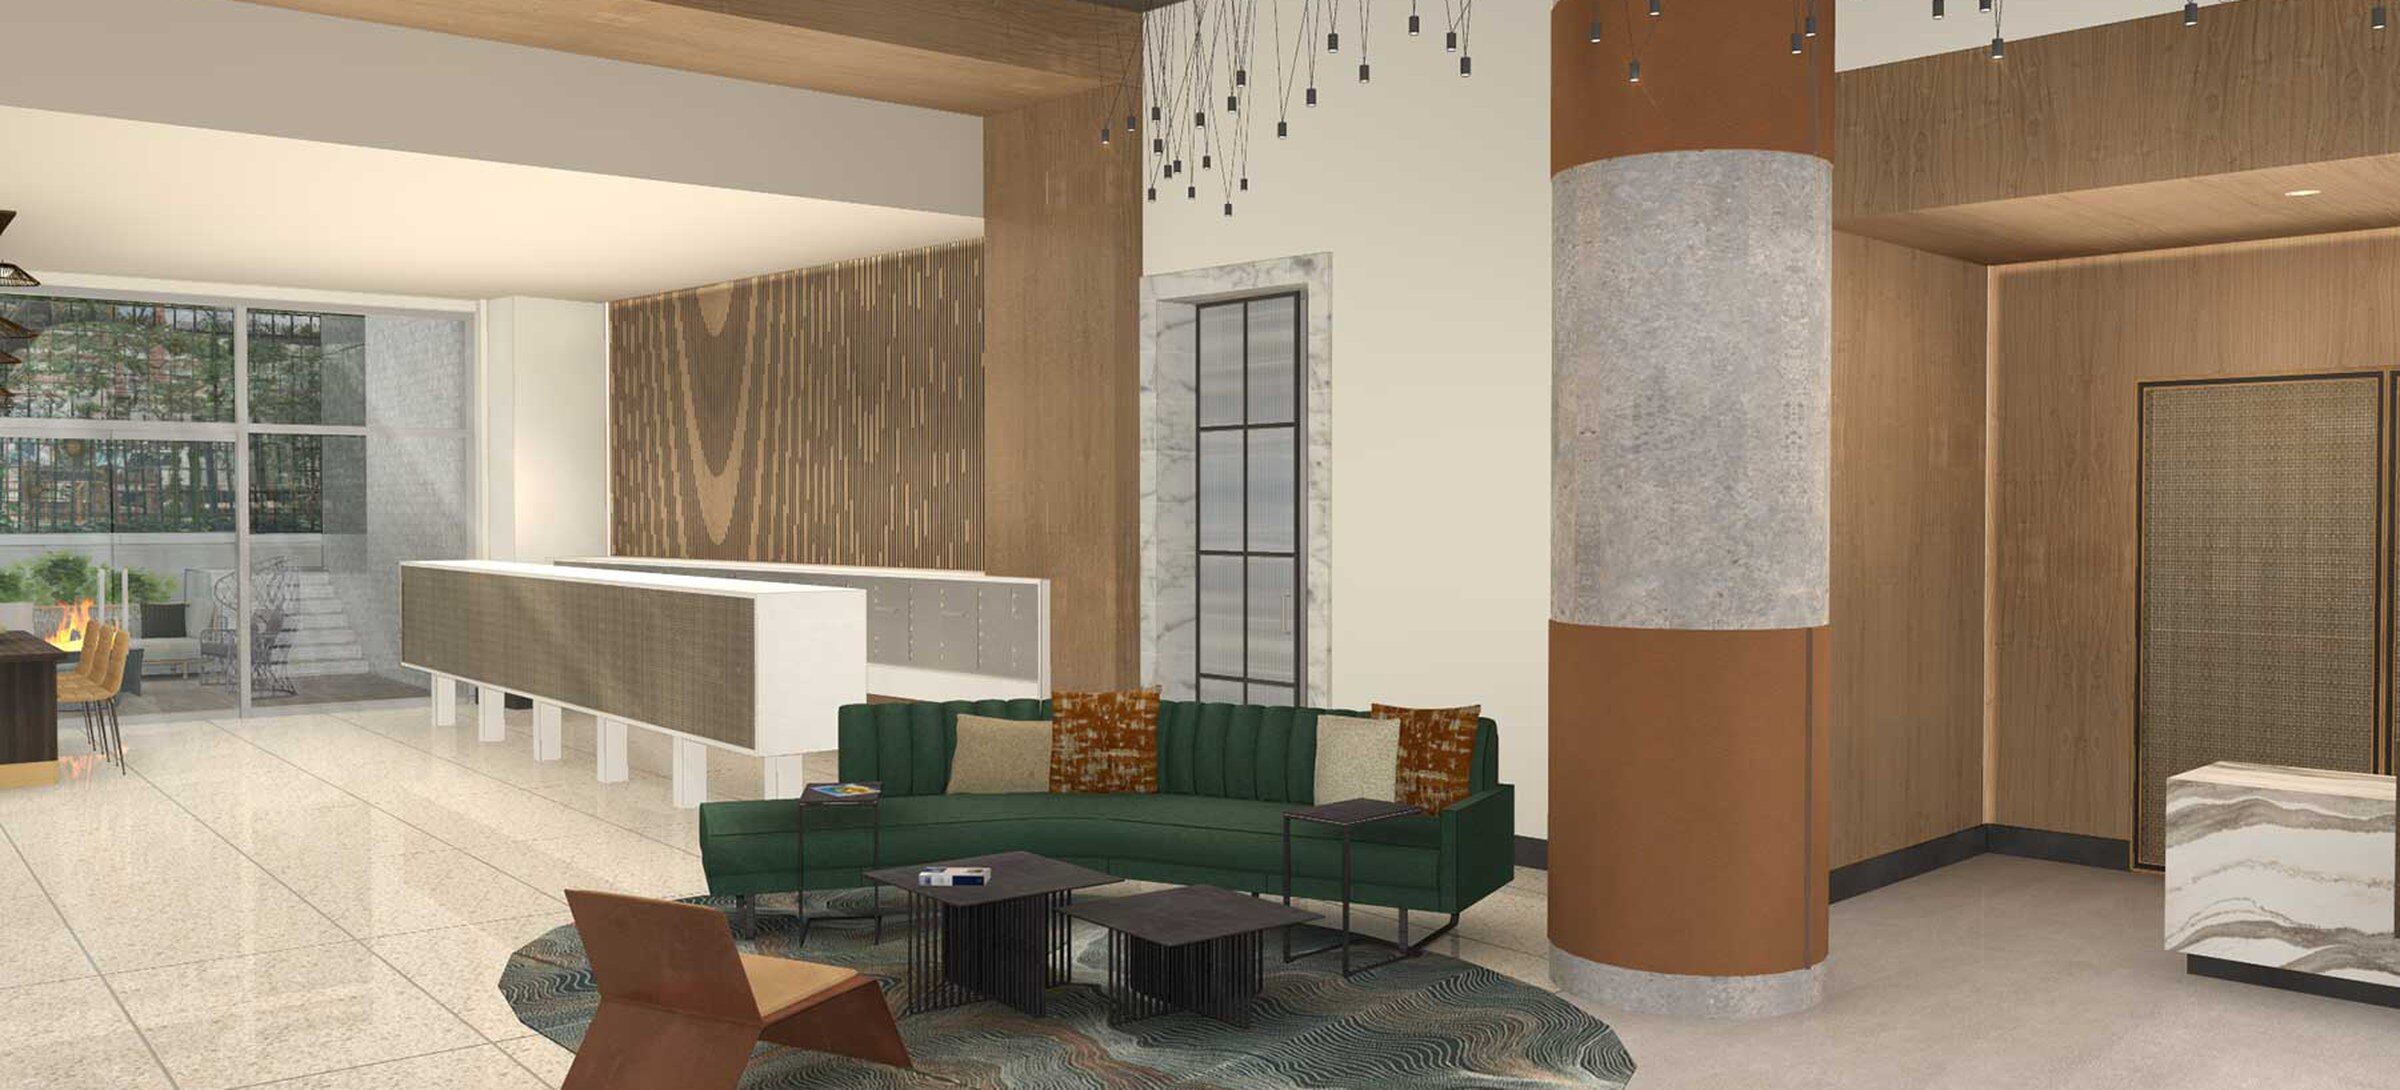 Coming Soon: Renovated lobby area with modern architecture and lounge furnishings (Rendering)